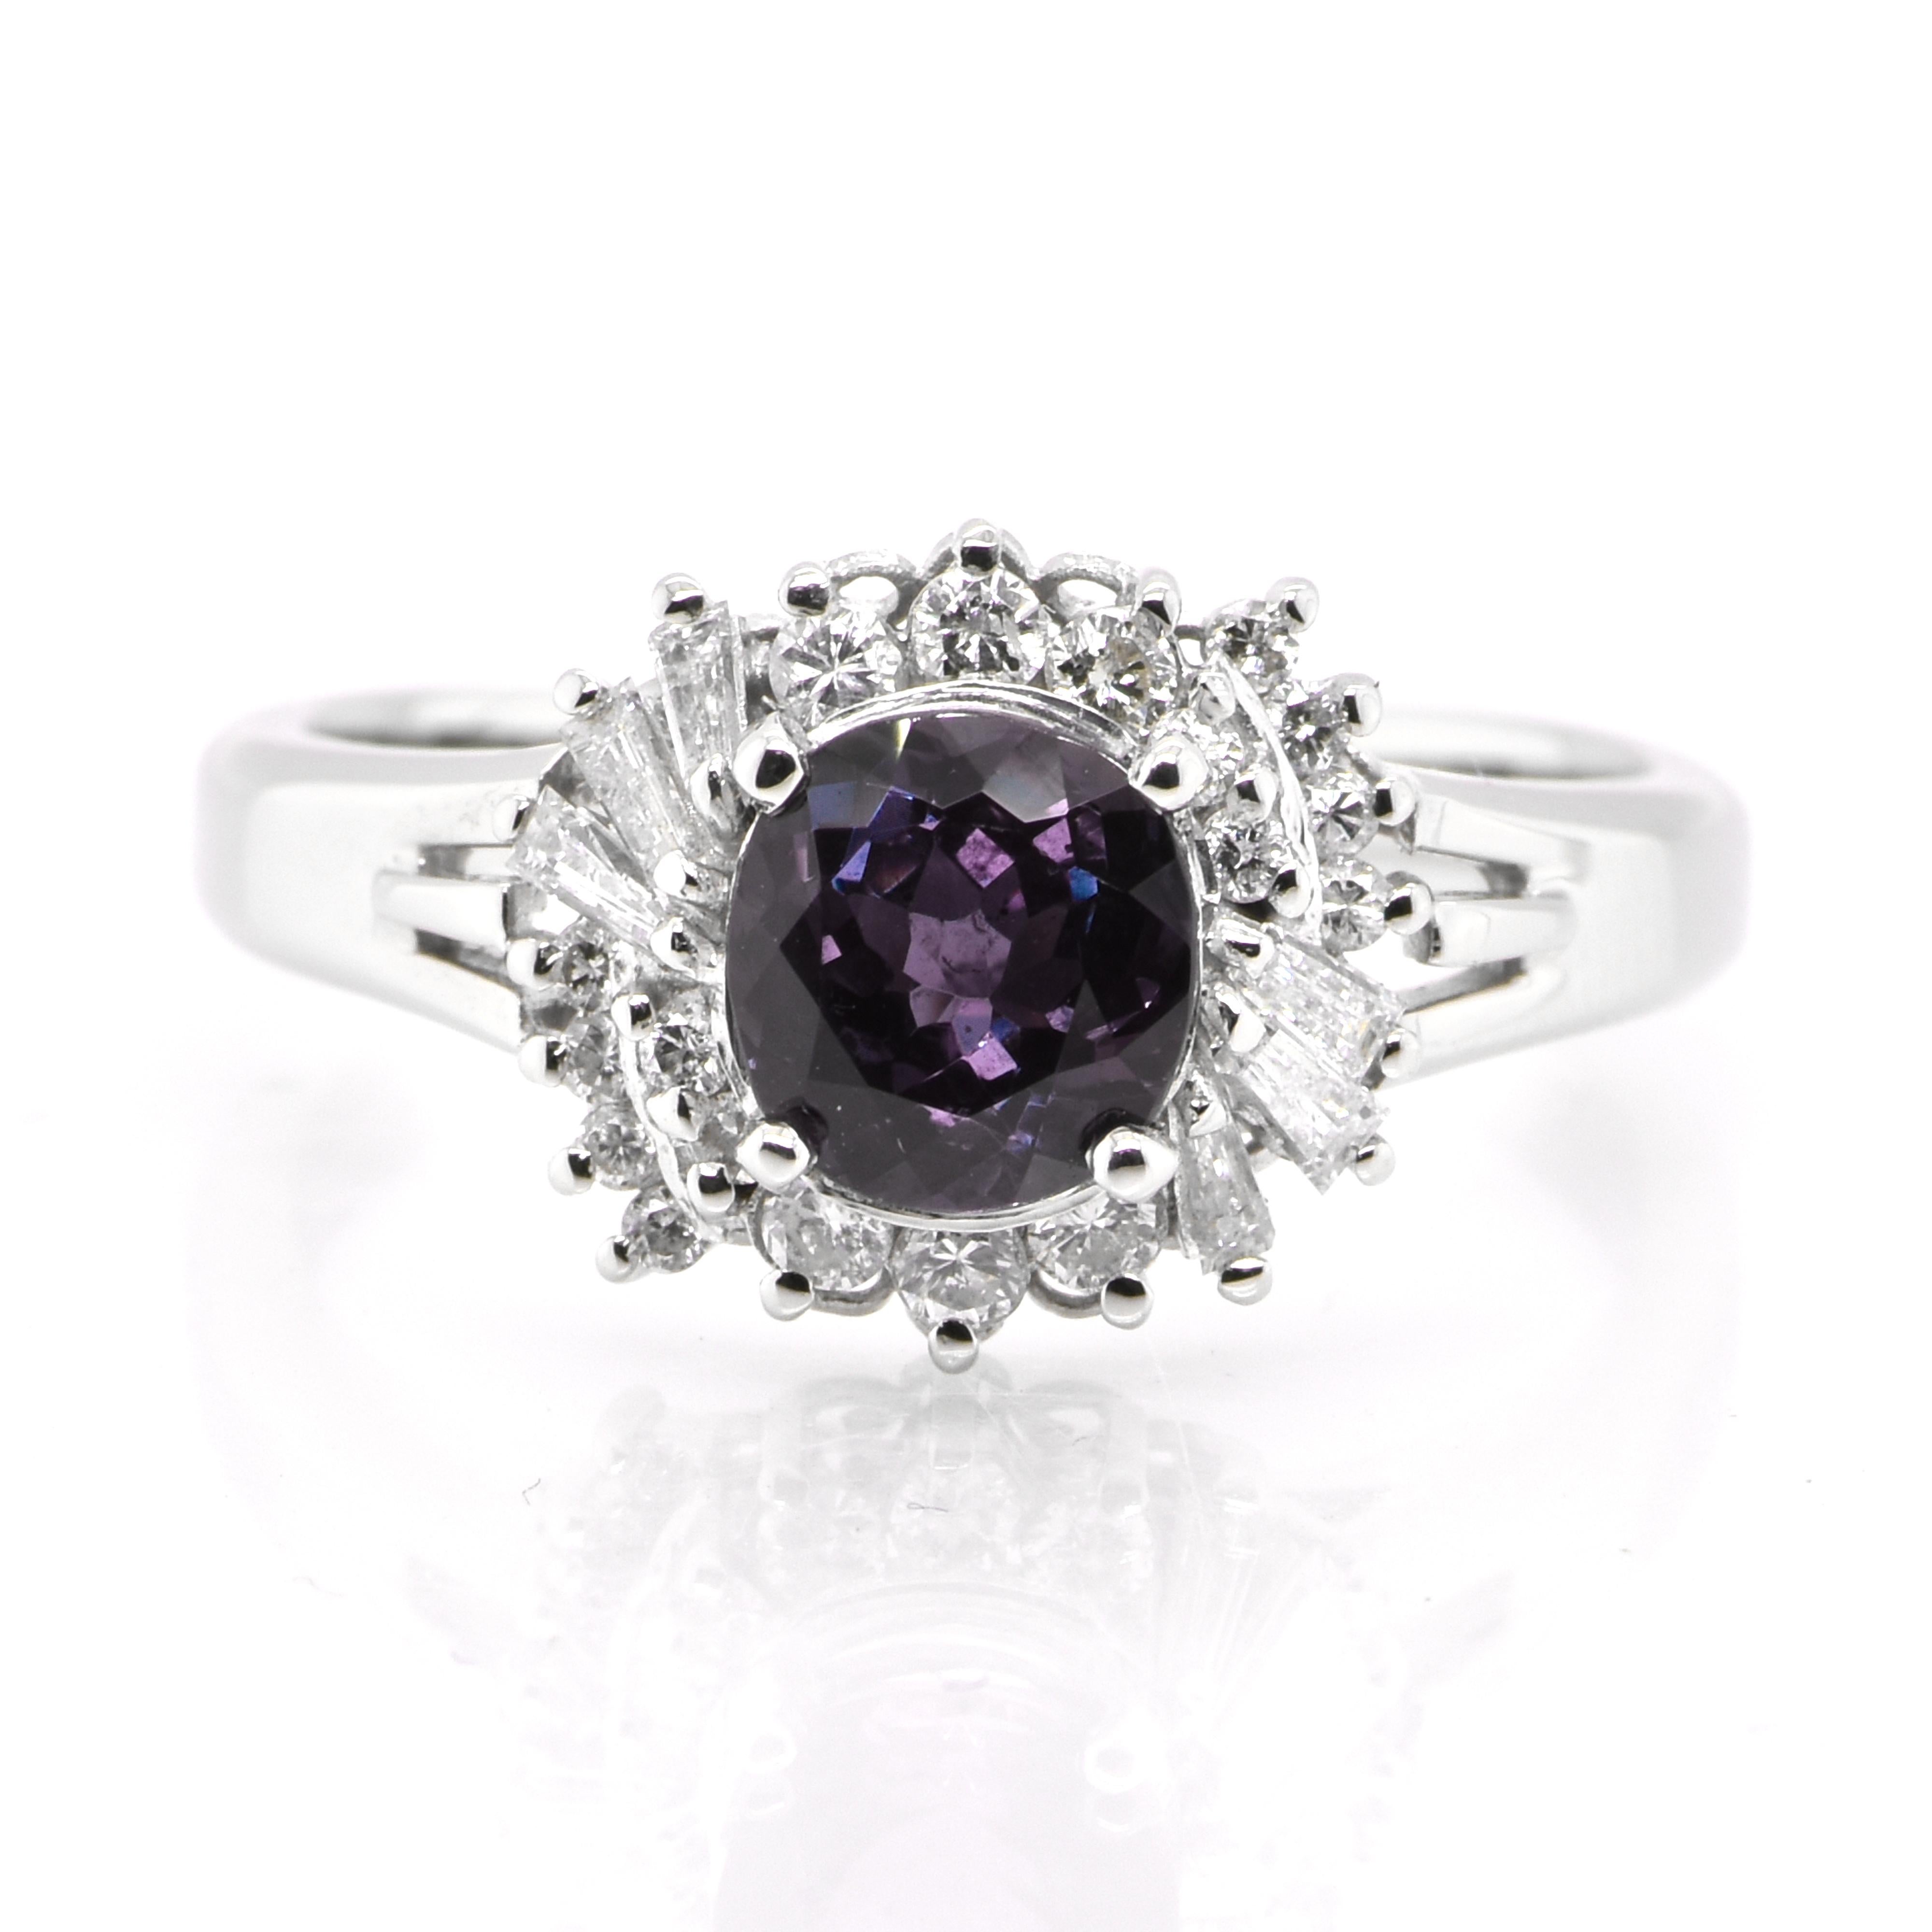 A gorgeous ring featuring a GIA Certified 0.92 Carat, Natural Brazilian Alexandrite and 0.31 Carats of Diamond Accents set in Platinum. Alexandrites produce a natural color-change phenomenon as they exhibit a Bluish Green Color under Fluorescent